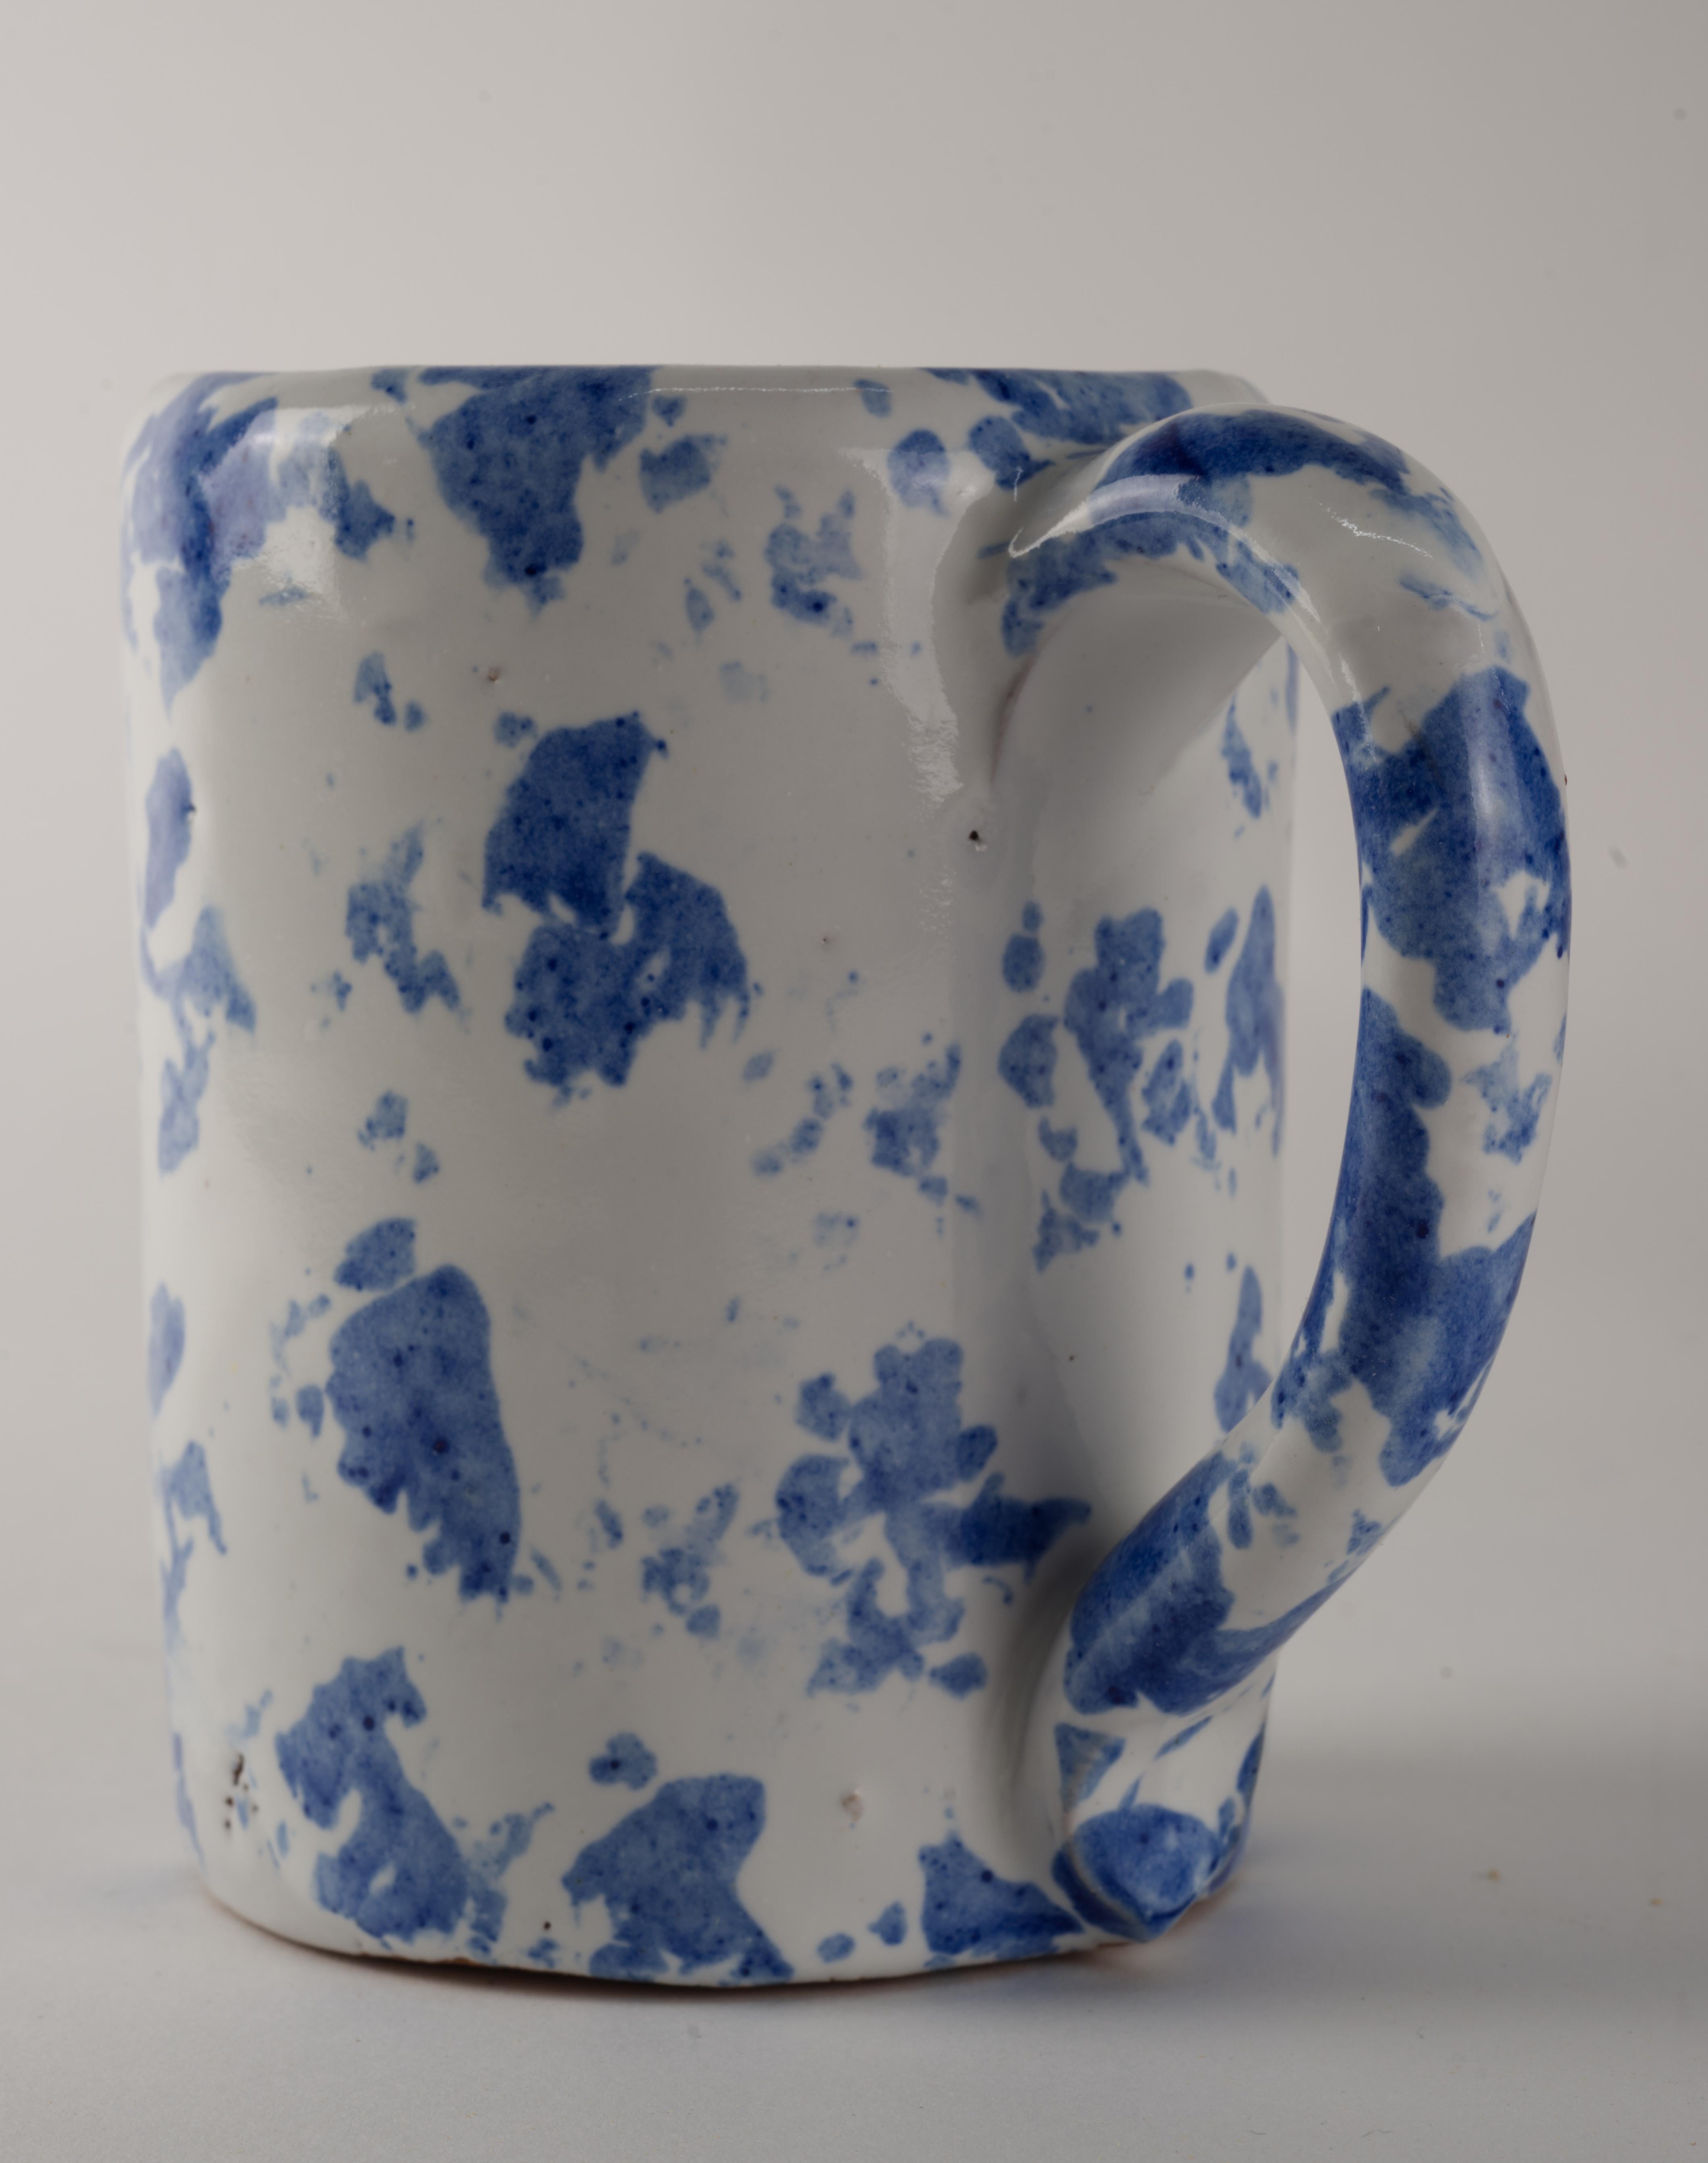 Rare Bybee Pottery Large Mug, Blue Spongeware Kentucky Art Pottery In Good Condition For Sale In Clifton Springs, NY